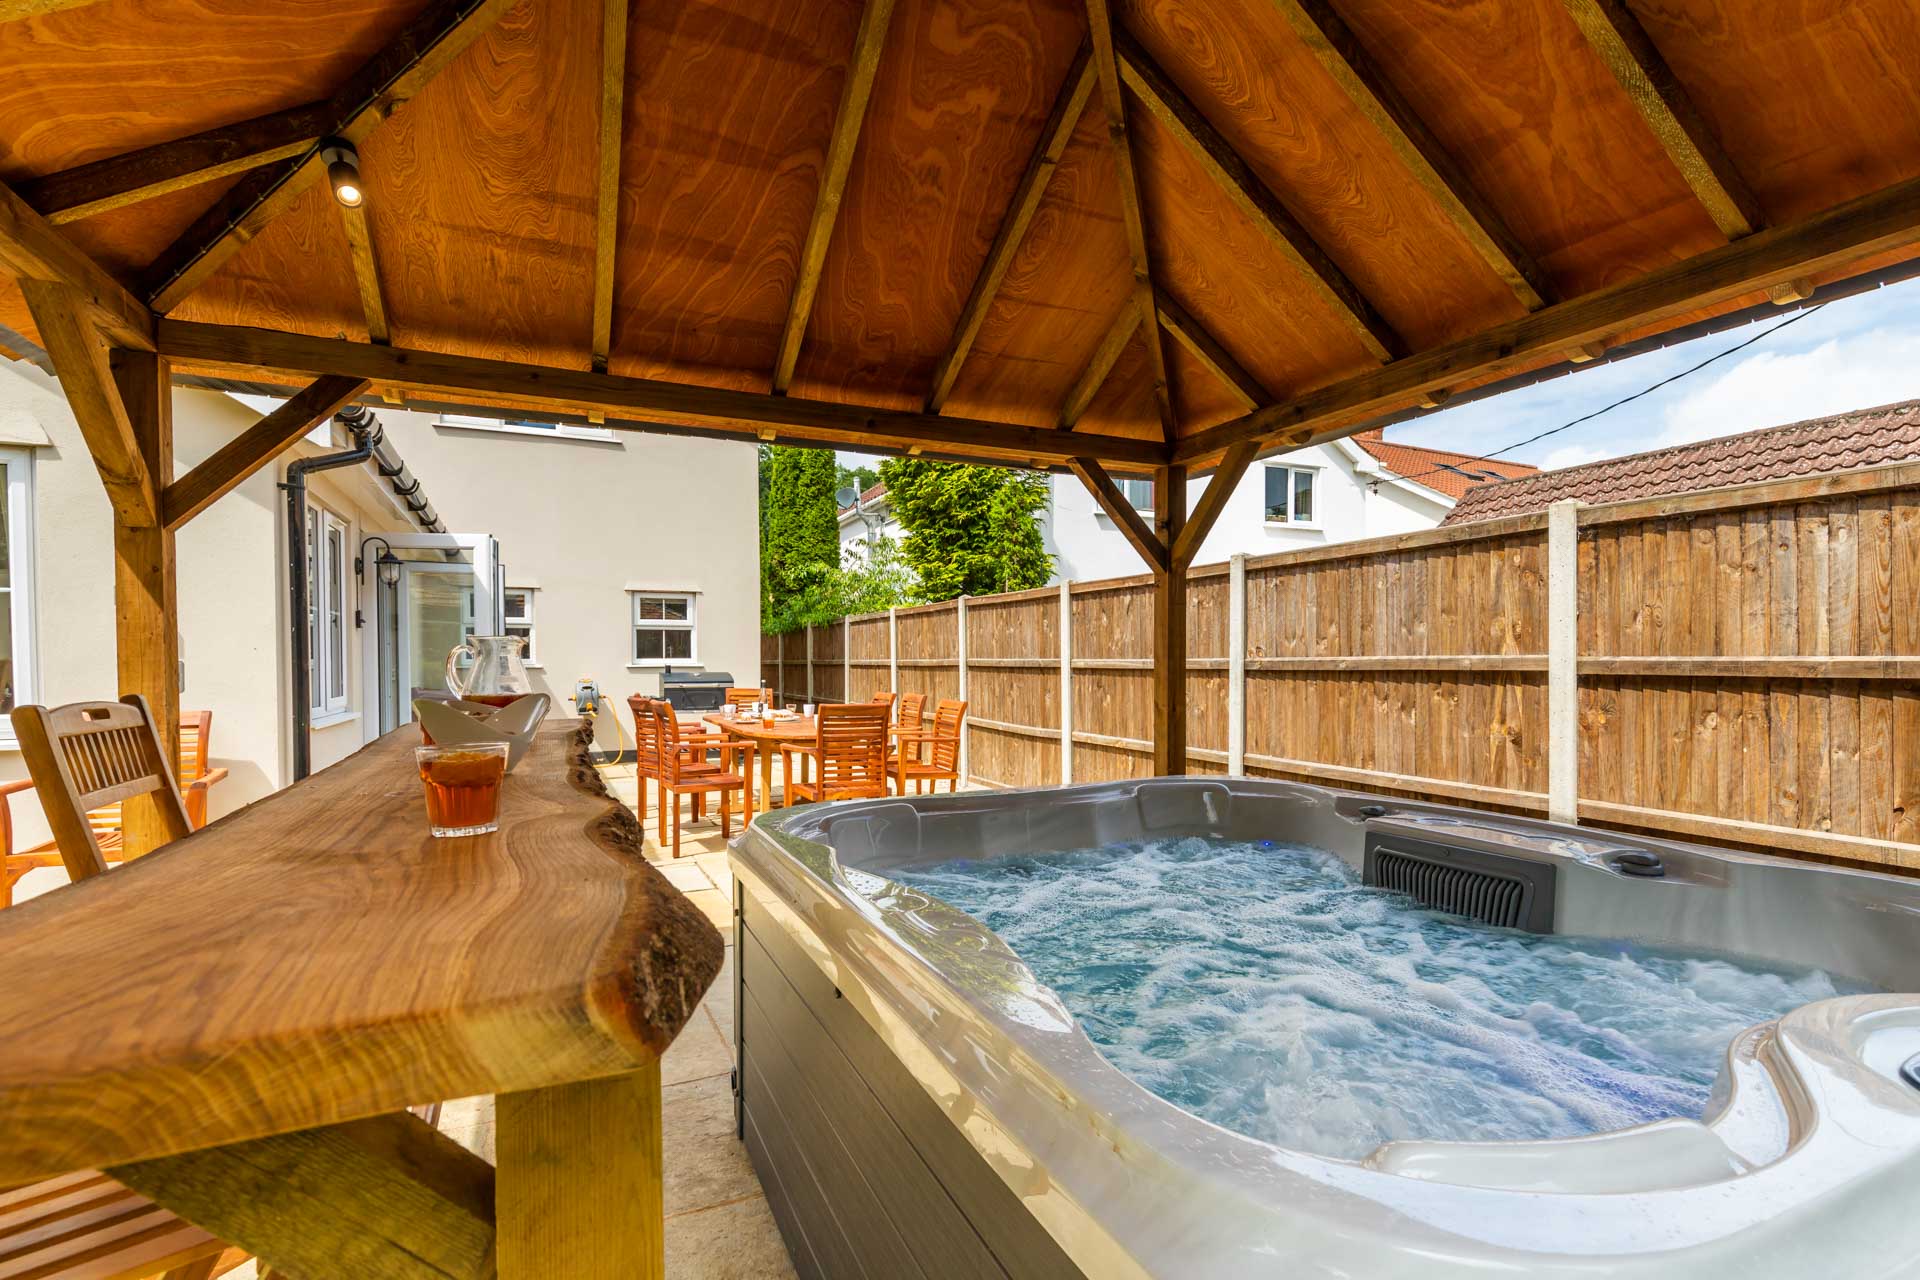 Norwich property, Woodside House, showing hot tub and wooden bar with shelter at the rear of the property.